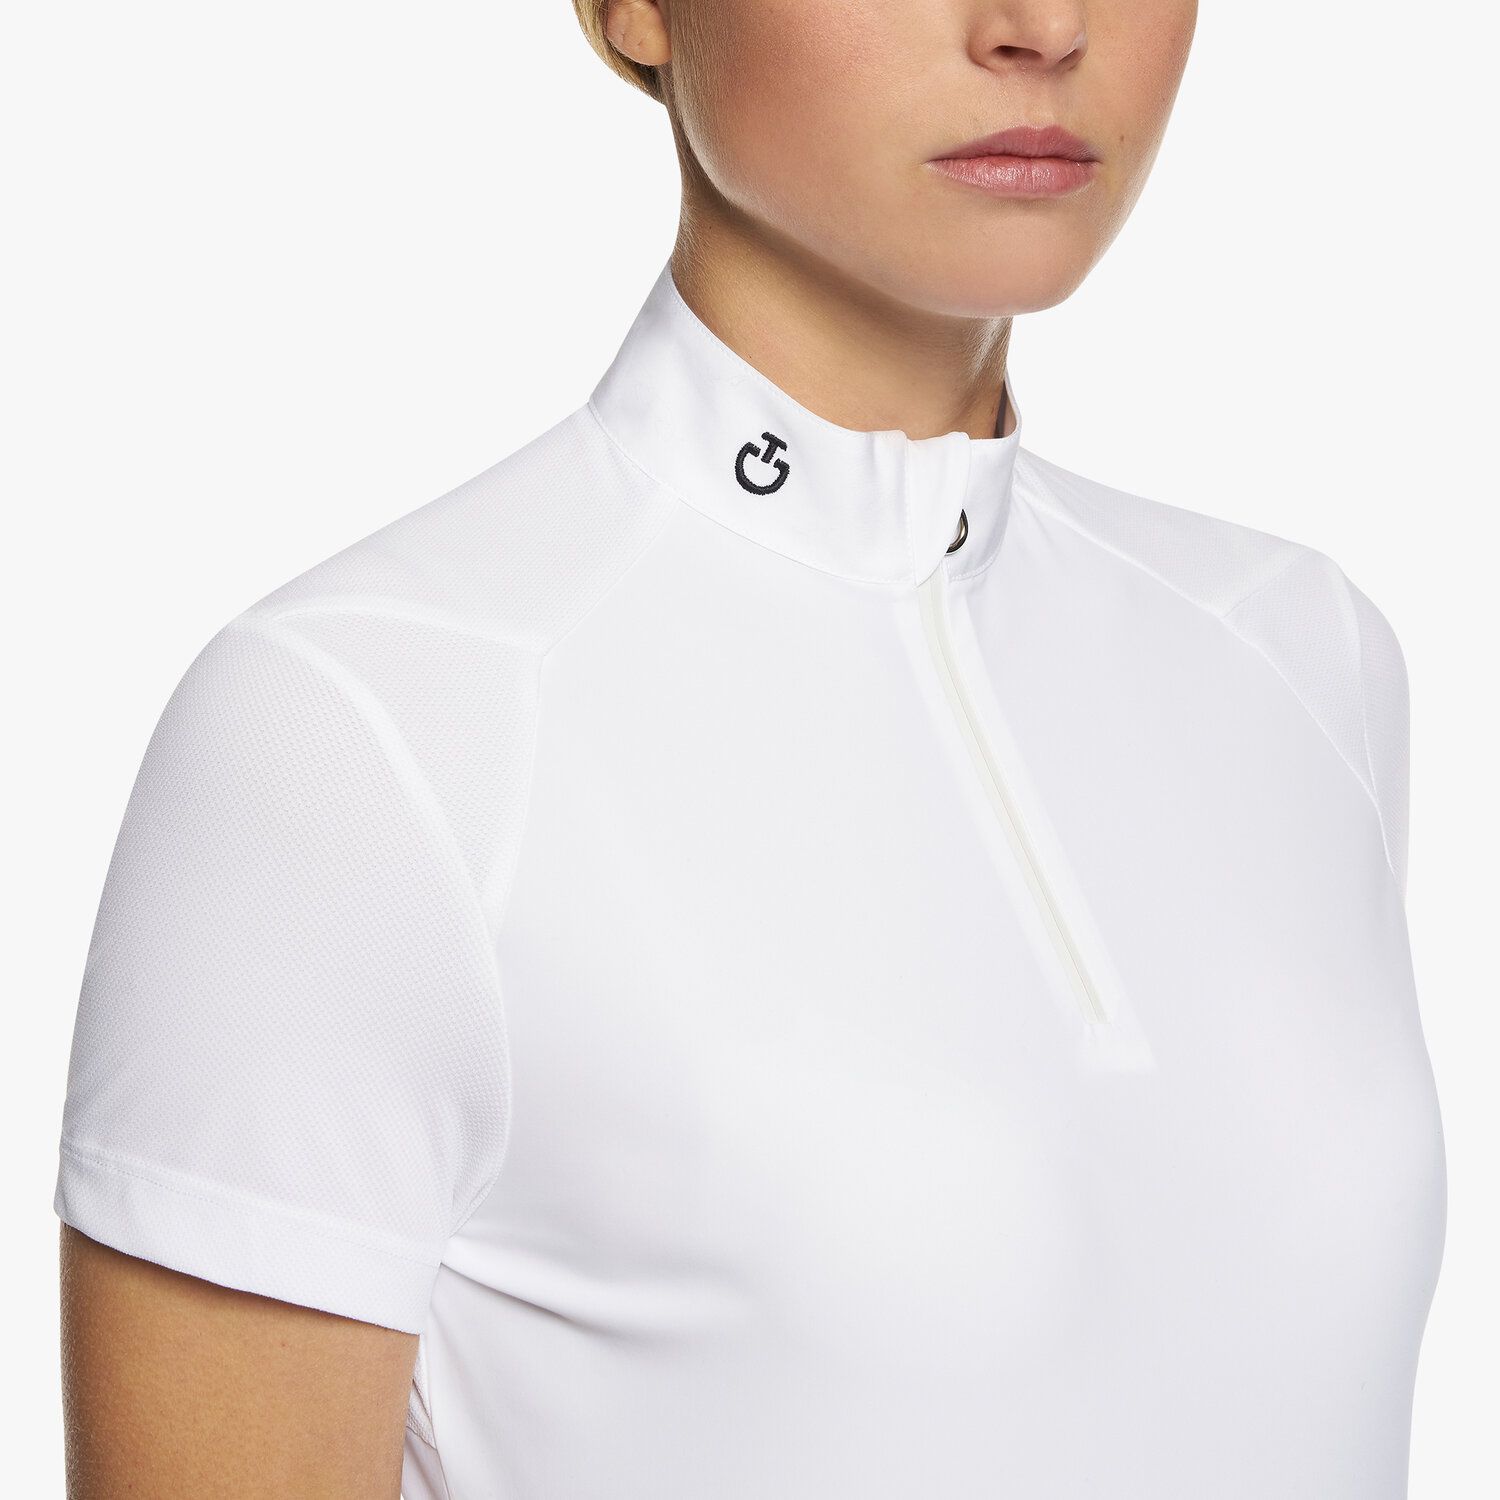 Cavalleria Toscana Women’s performance jersey show shirt with a zip WHITE-4